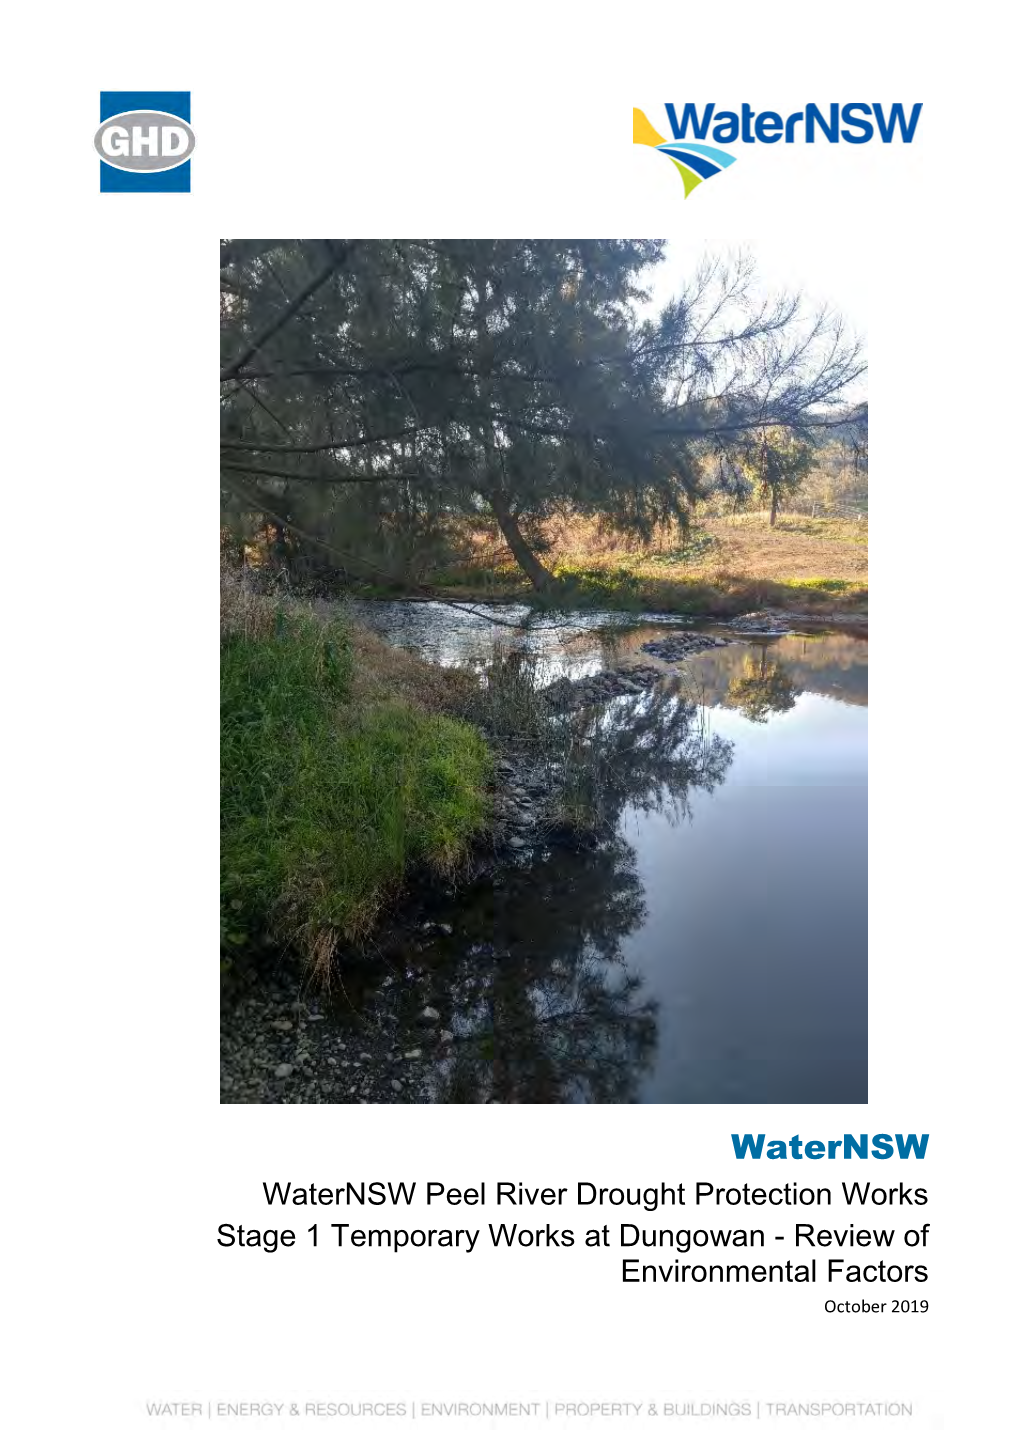 Drought Protection Works Stage 1 Temporary Works at Dungowan - Review of Environmental Factors October 2019